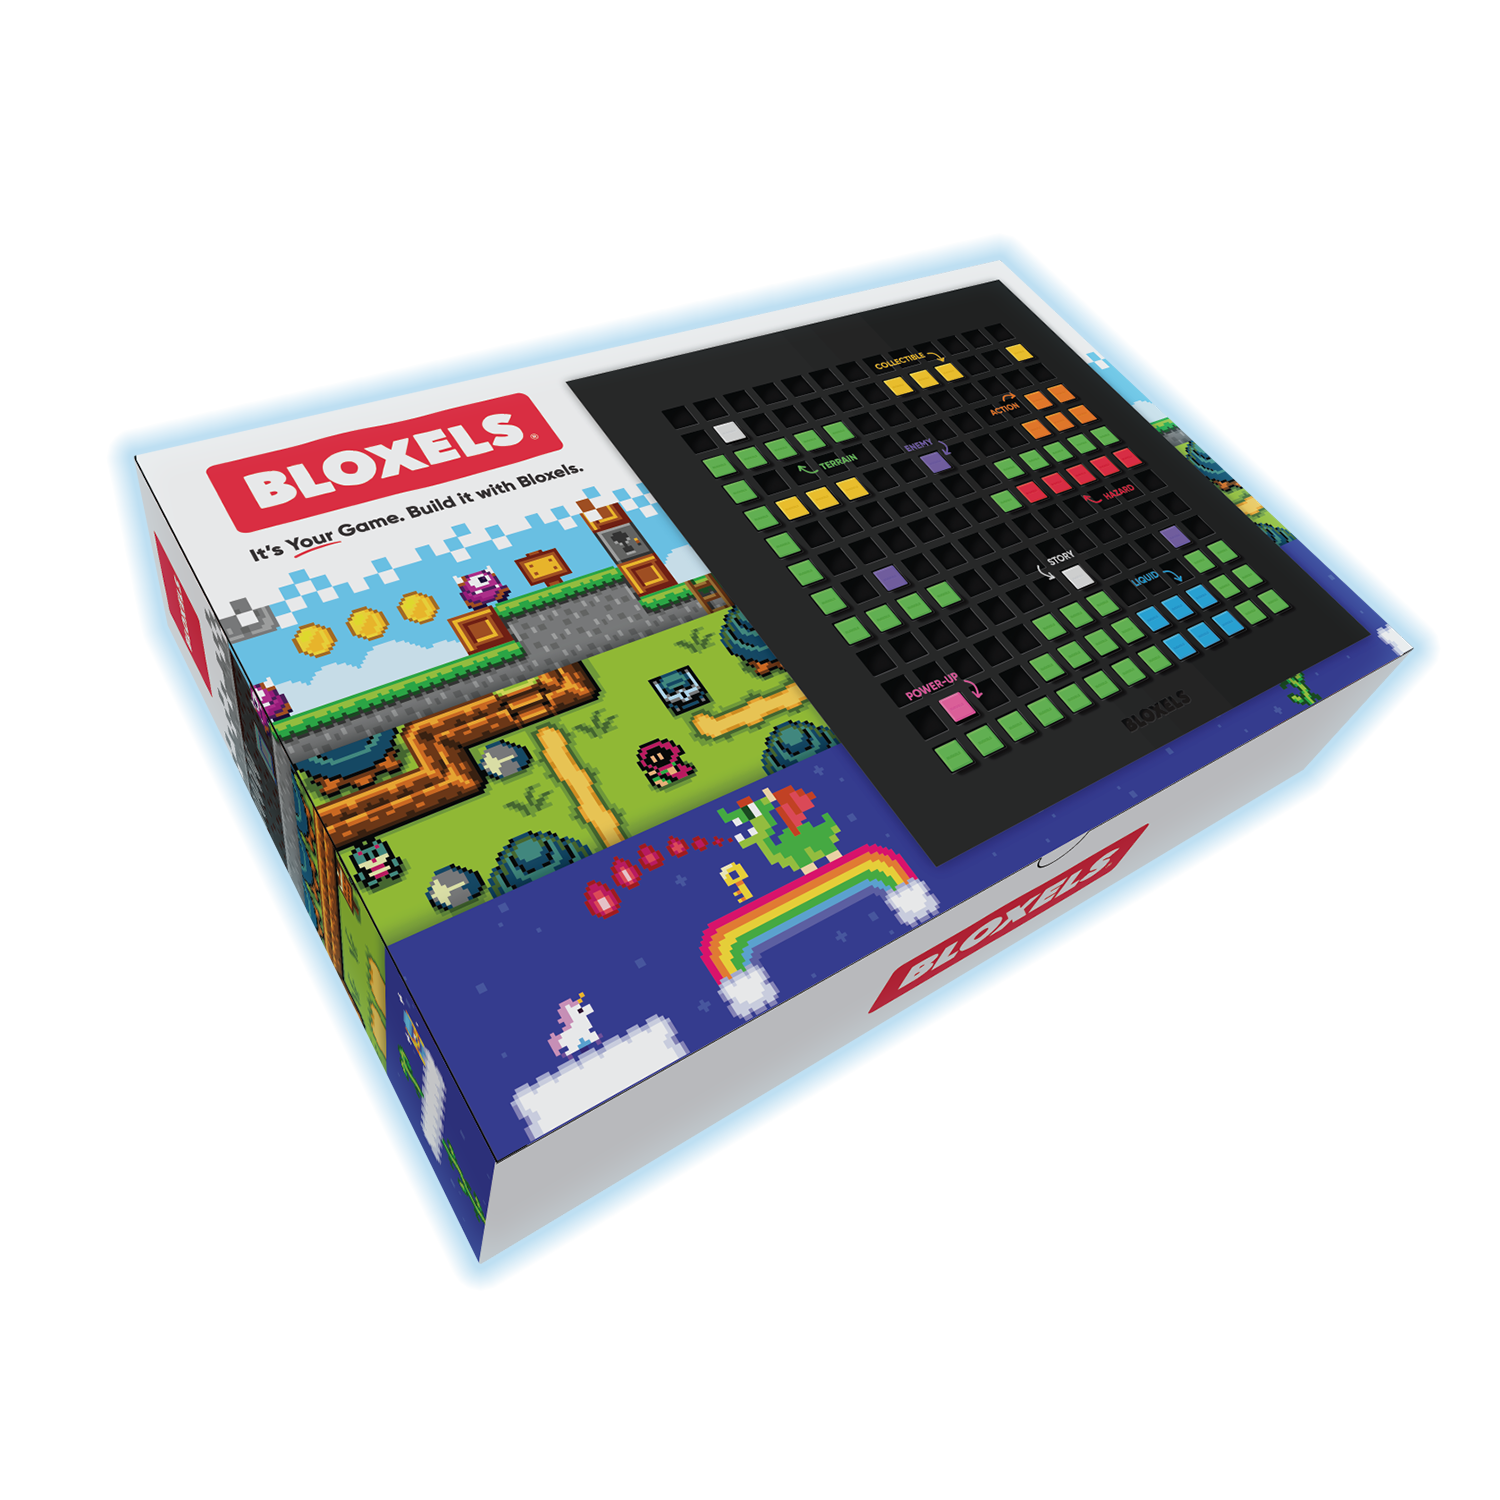  Bloxels Build Your Own Video Games: Official Kit - Includes  Bloxels Account - Award-Winning STEM Toy, No Coding Required - Ages 8+ :  Toys & Games